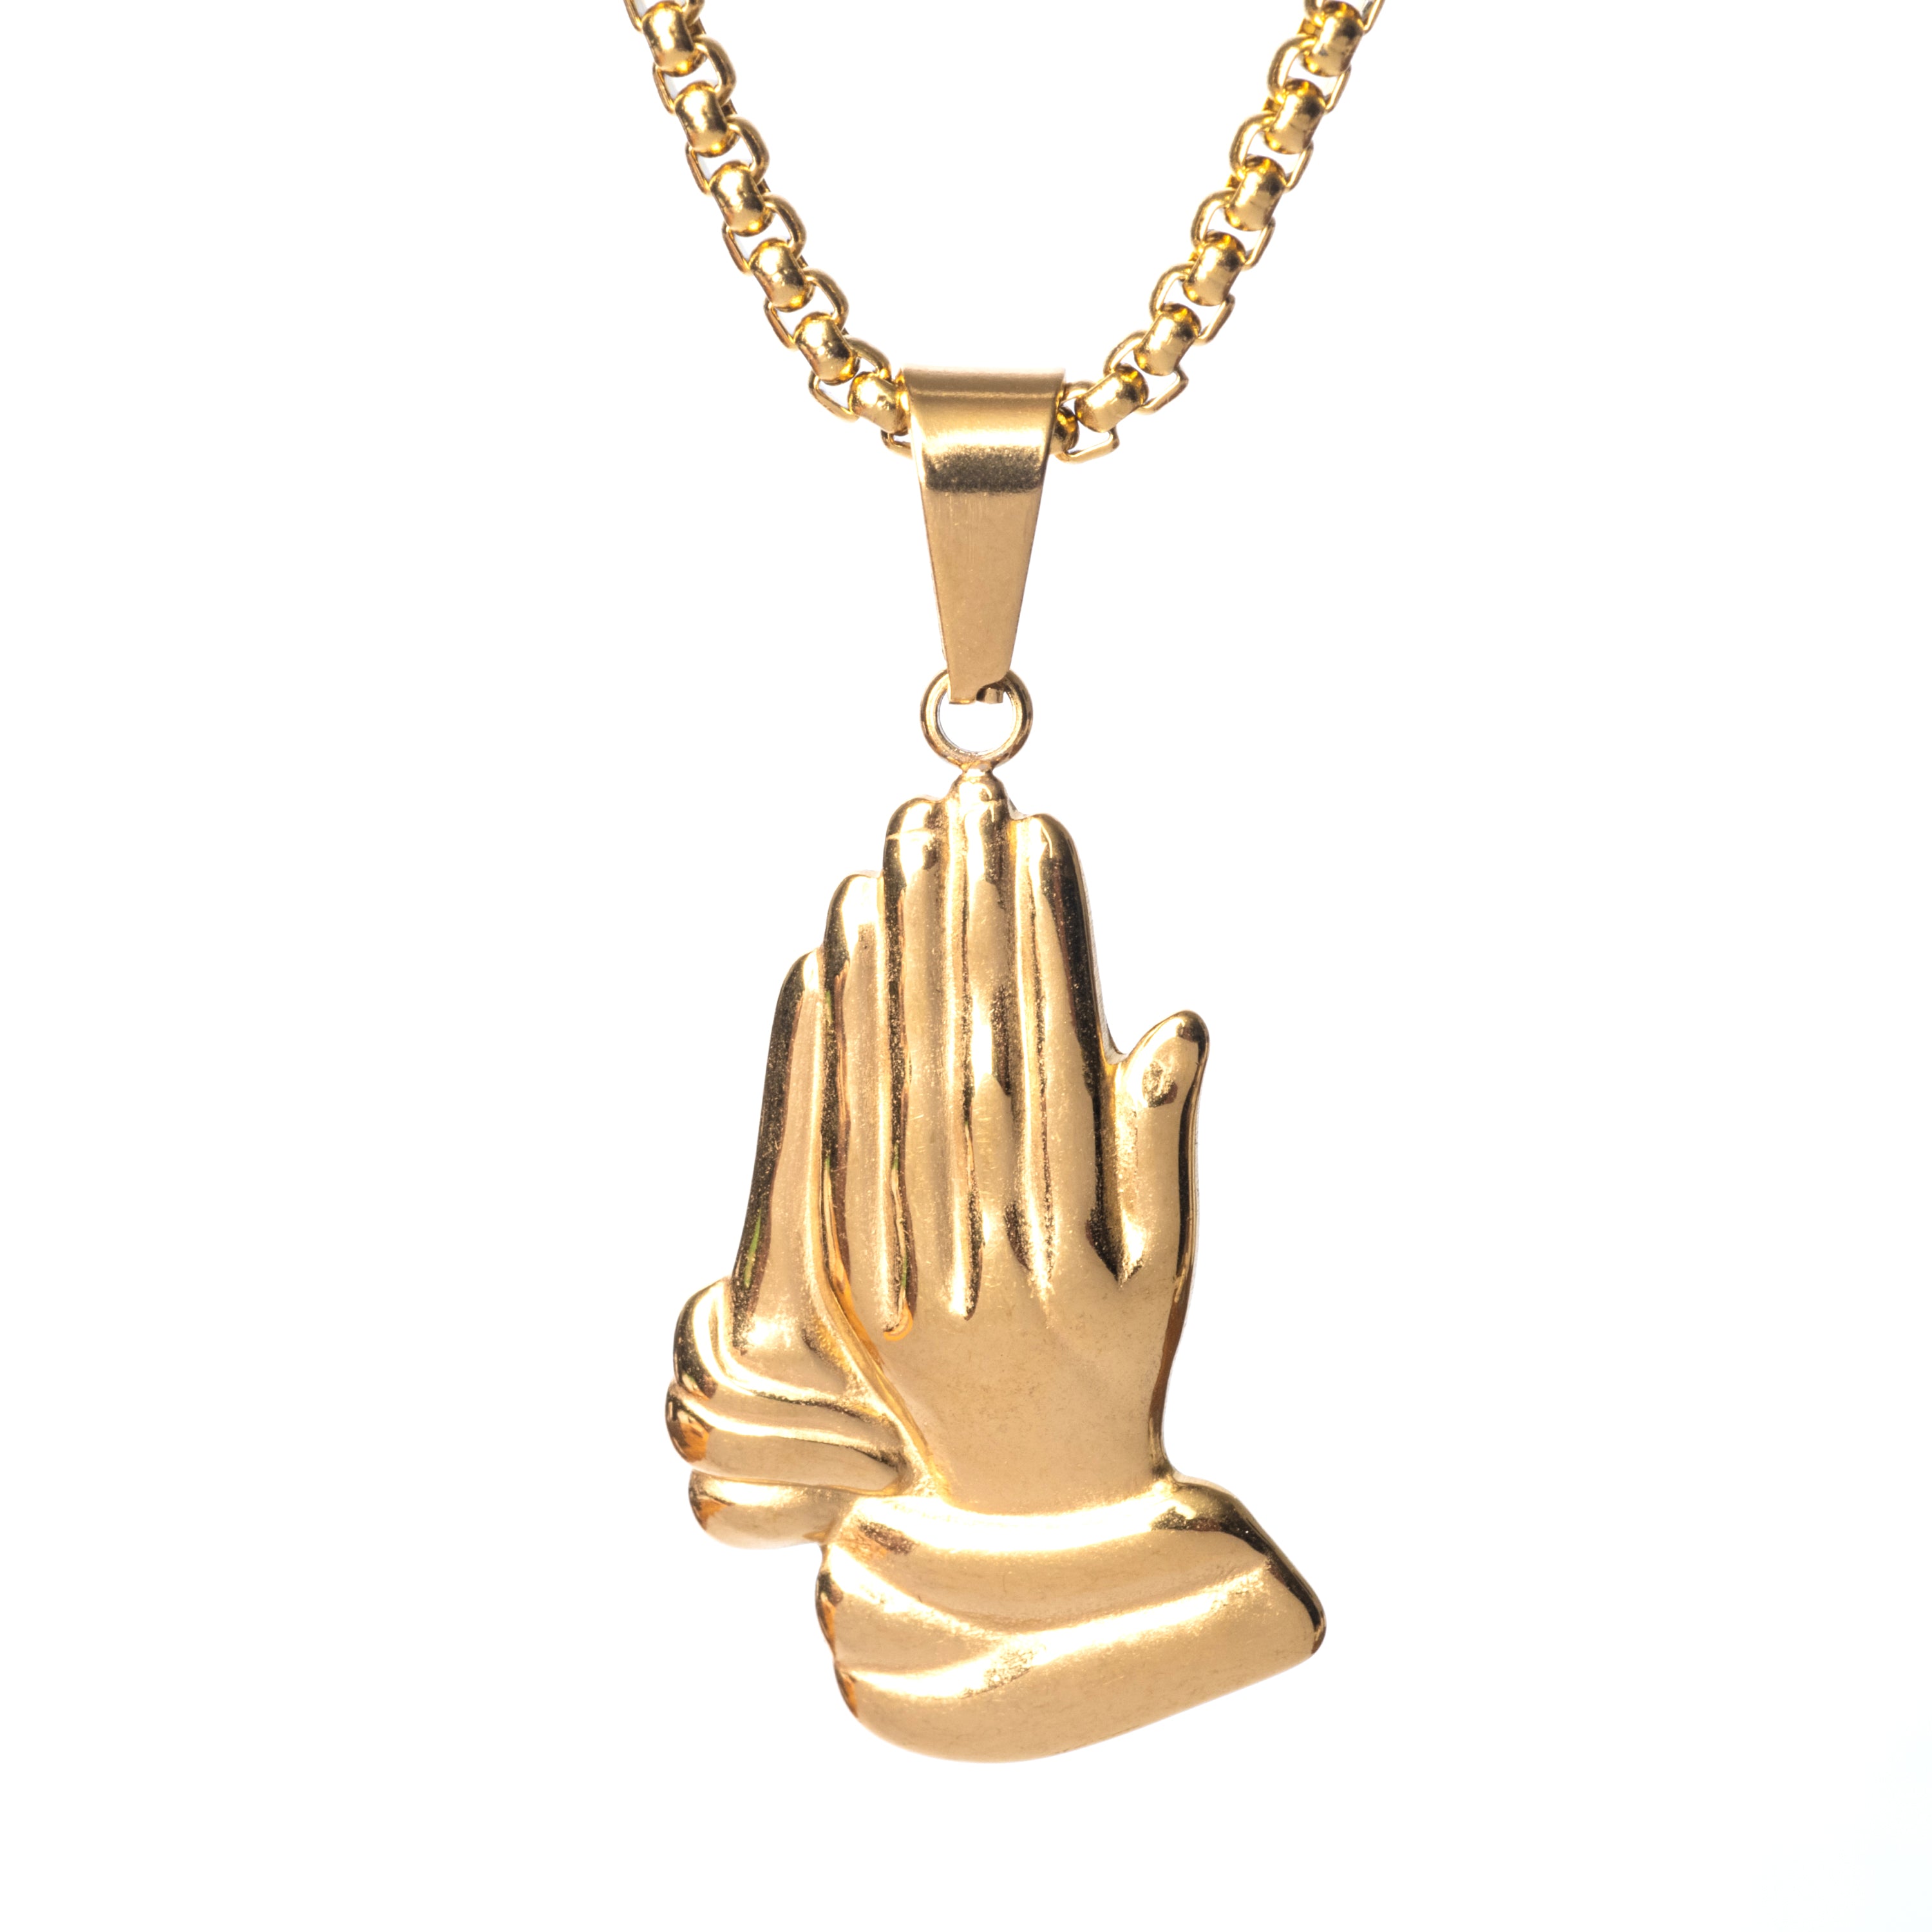 The Religious Necklace